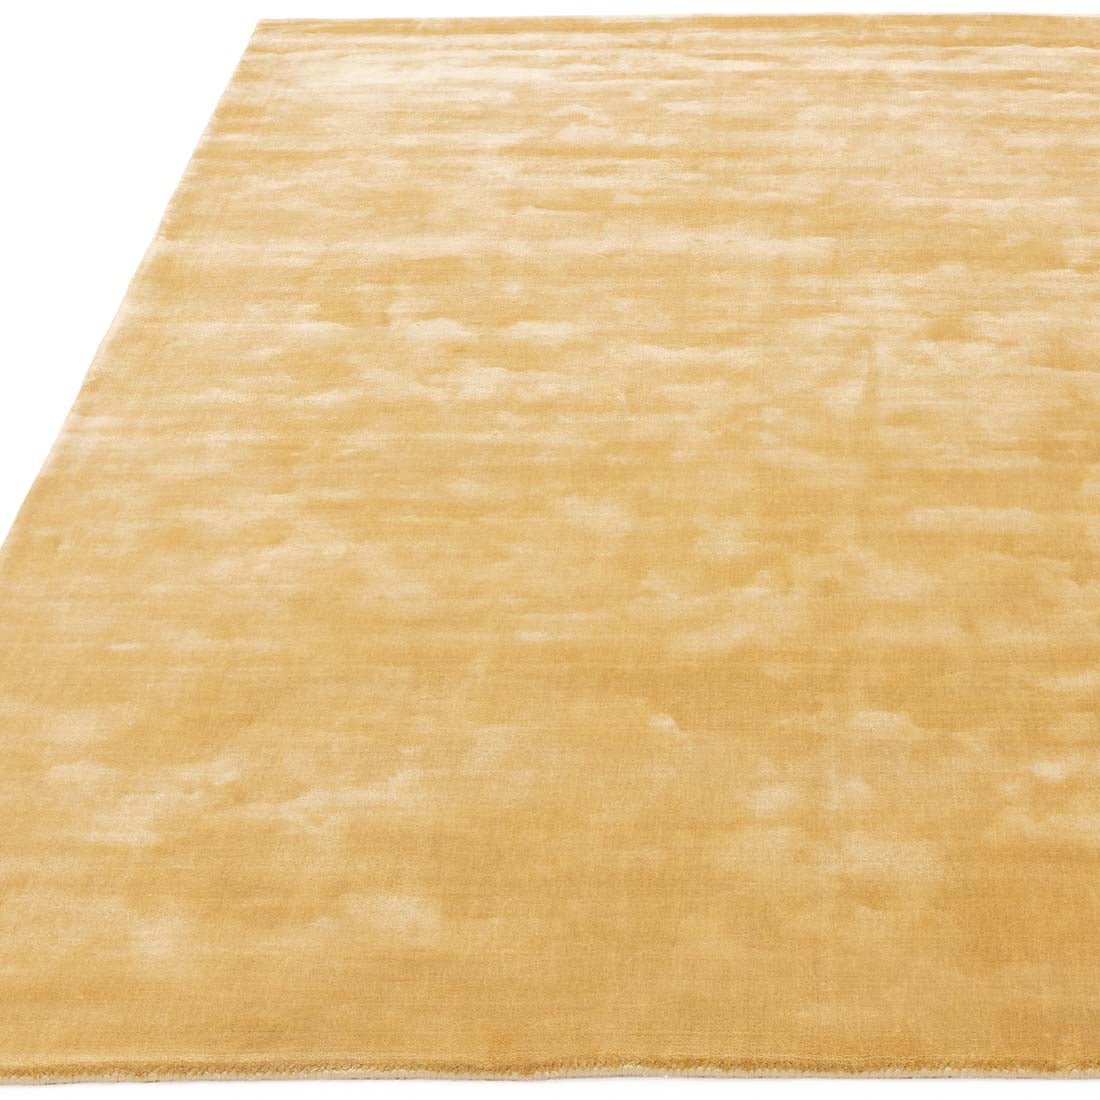 shiny gold modern rug in a plain style
